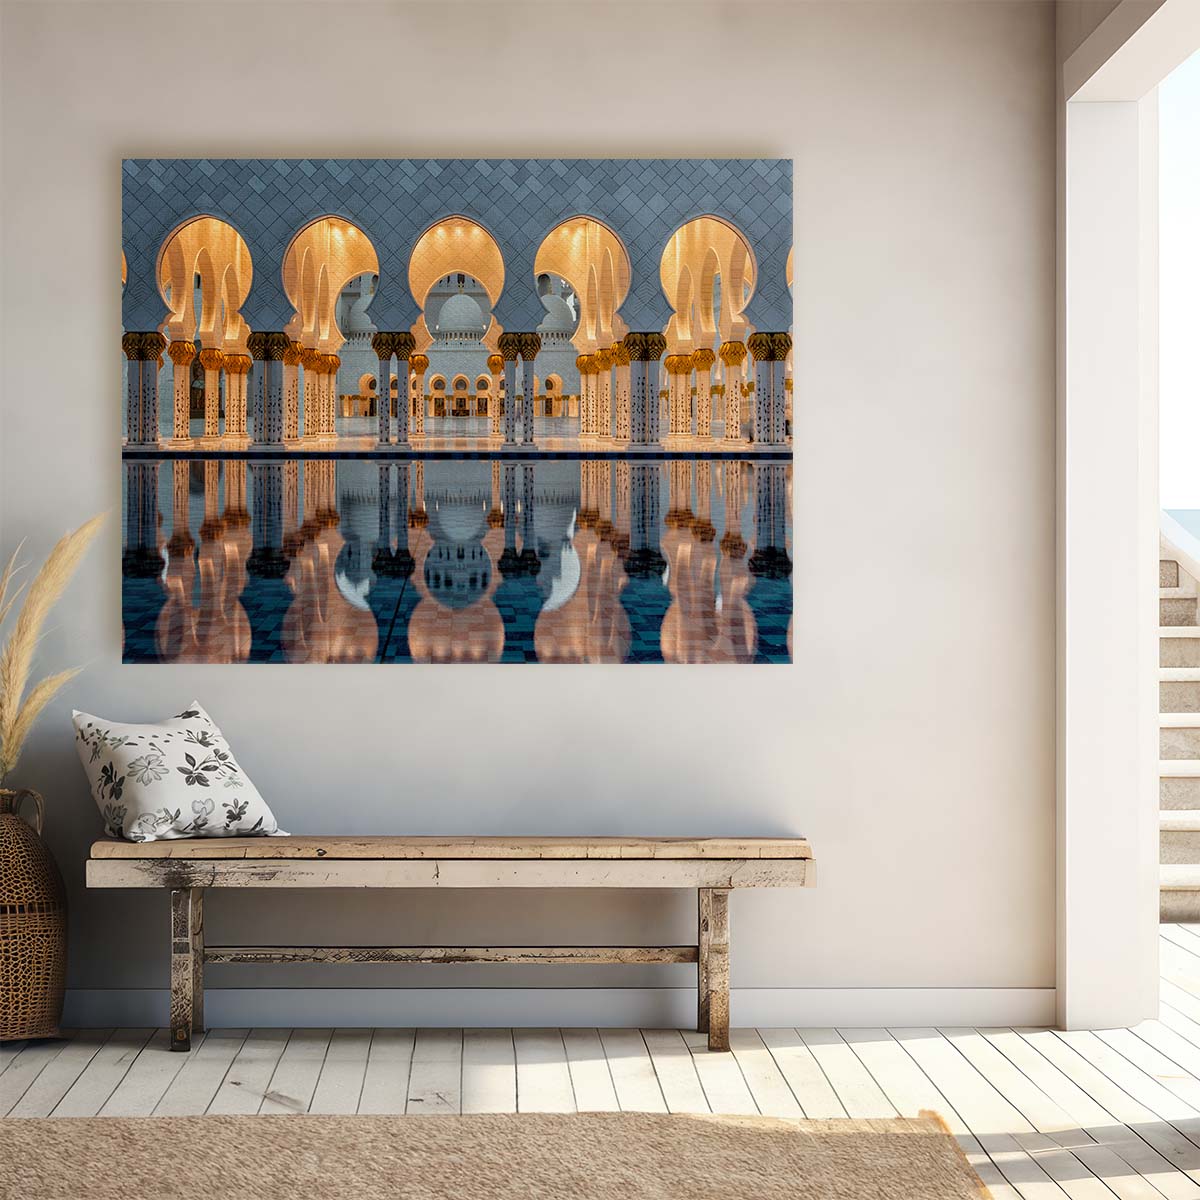 Sacred Sheikh Zayed Mosque Reflection Wall Art by Luxuriance Designs. Made in USA.